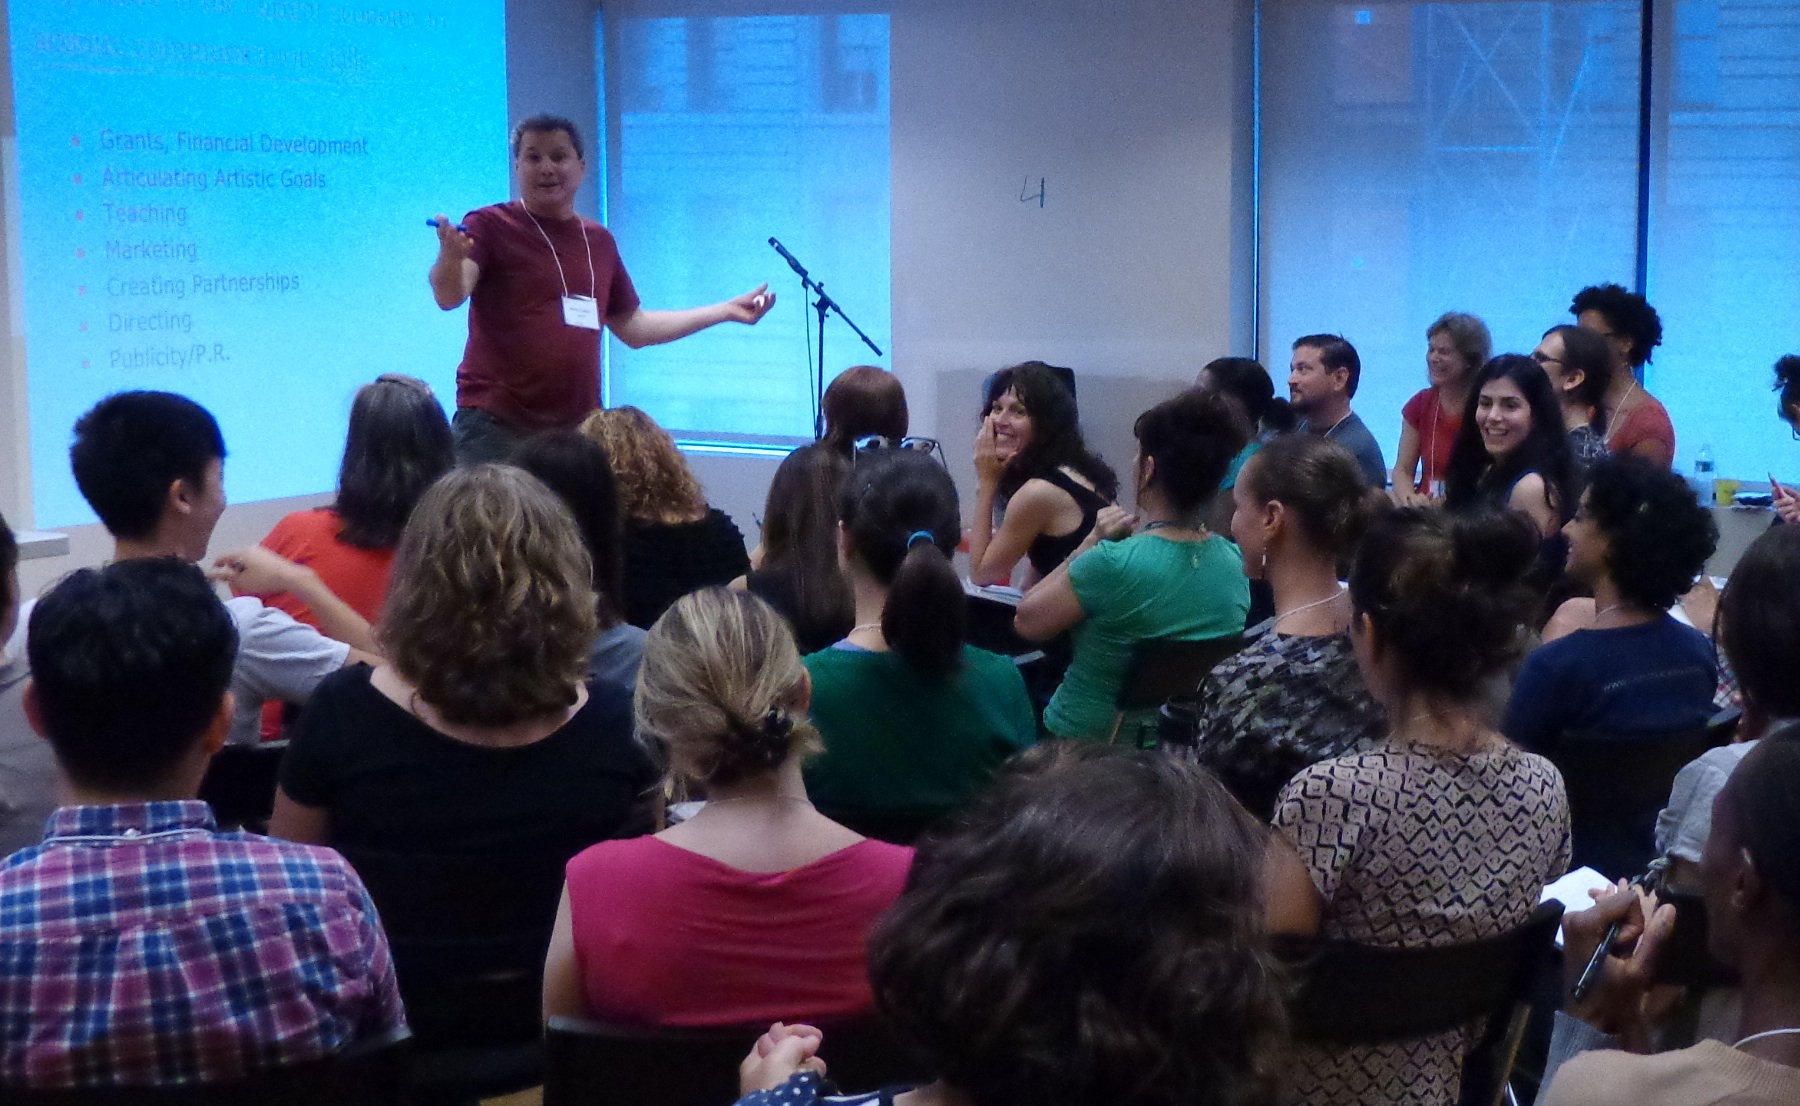 Kirby Tepper leads a Verbal Communications Workshop at the 2013 Artists Summer Institute